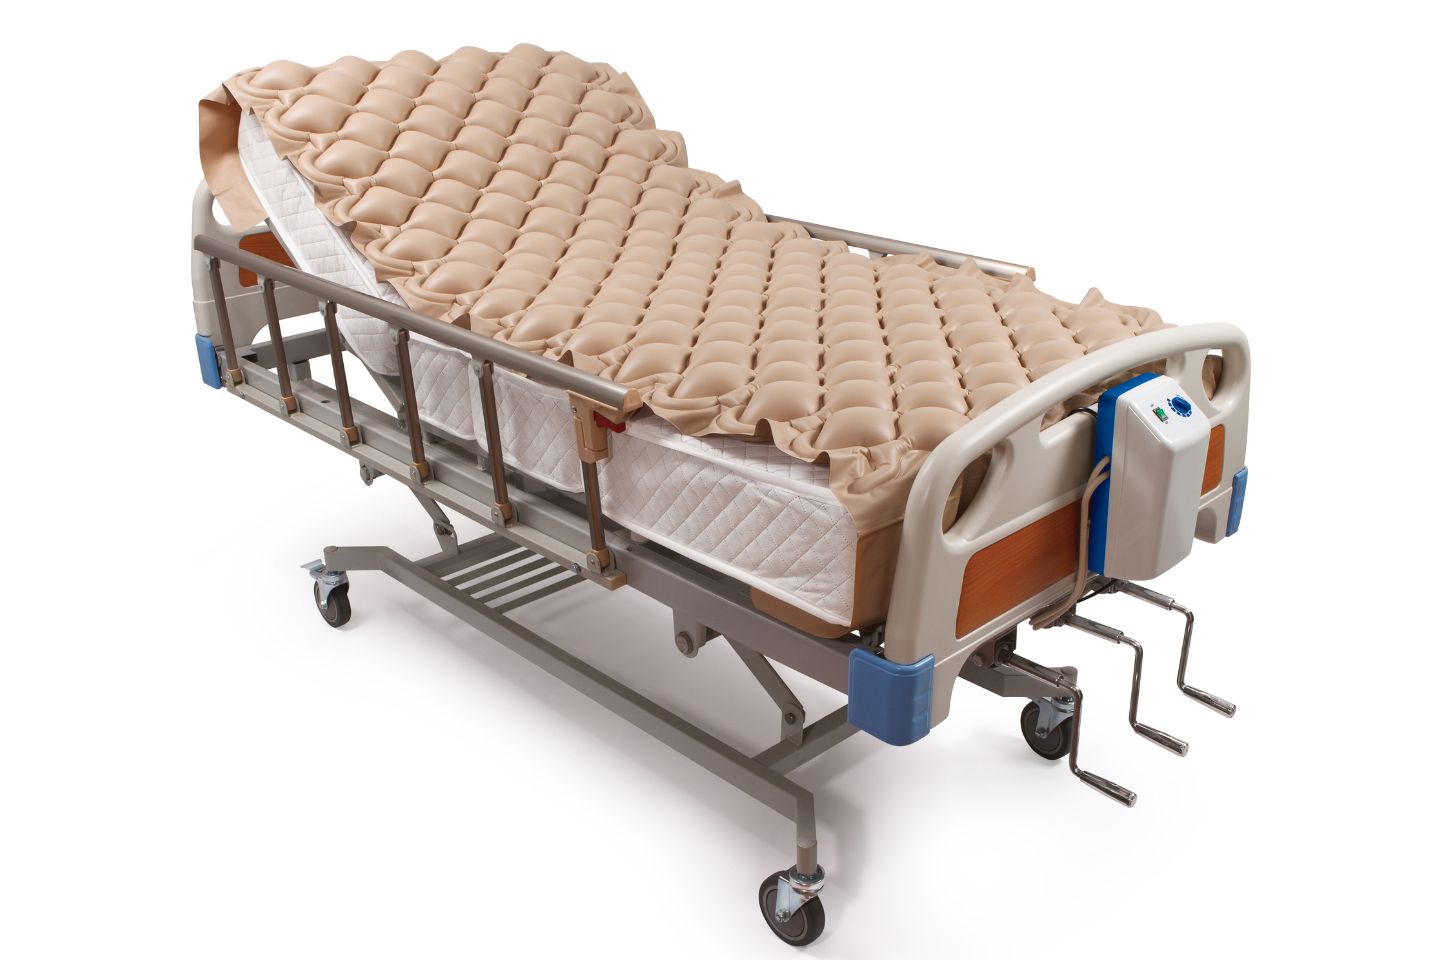 A Selection of Medical Mattress Toppers